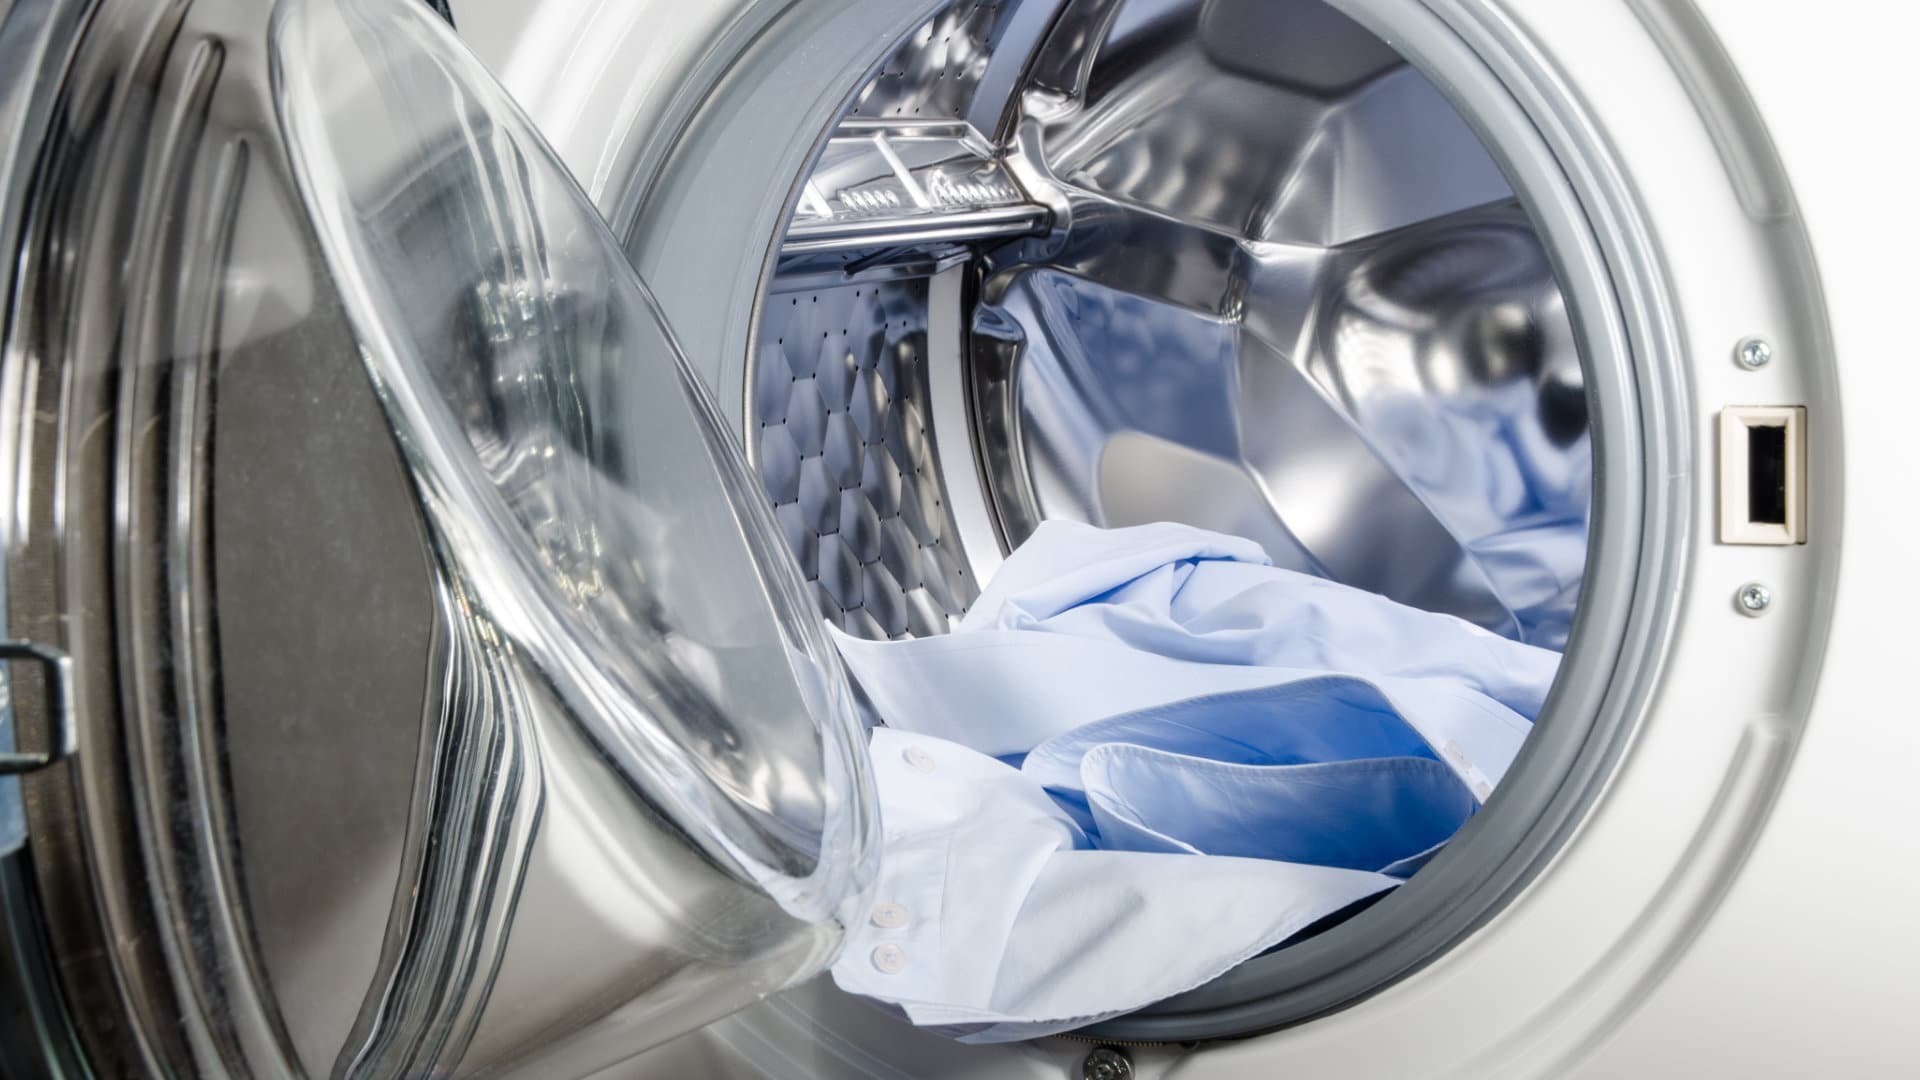 How To Stop A Samsung Washing Machine Mid-Cycle